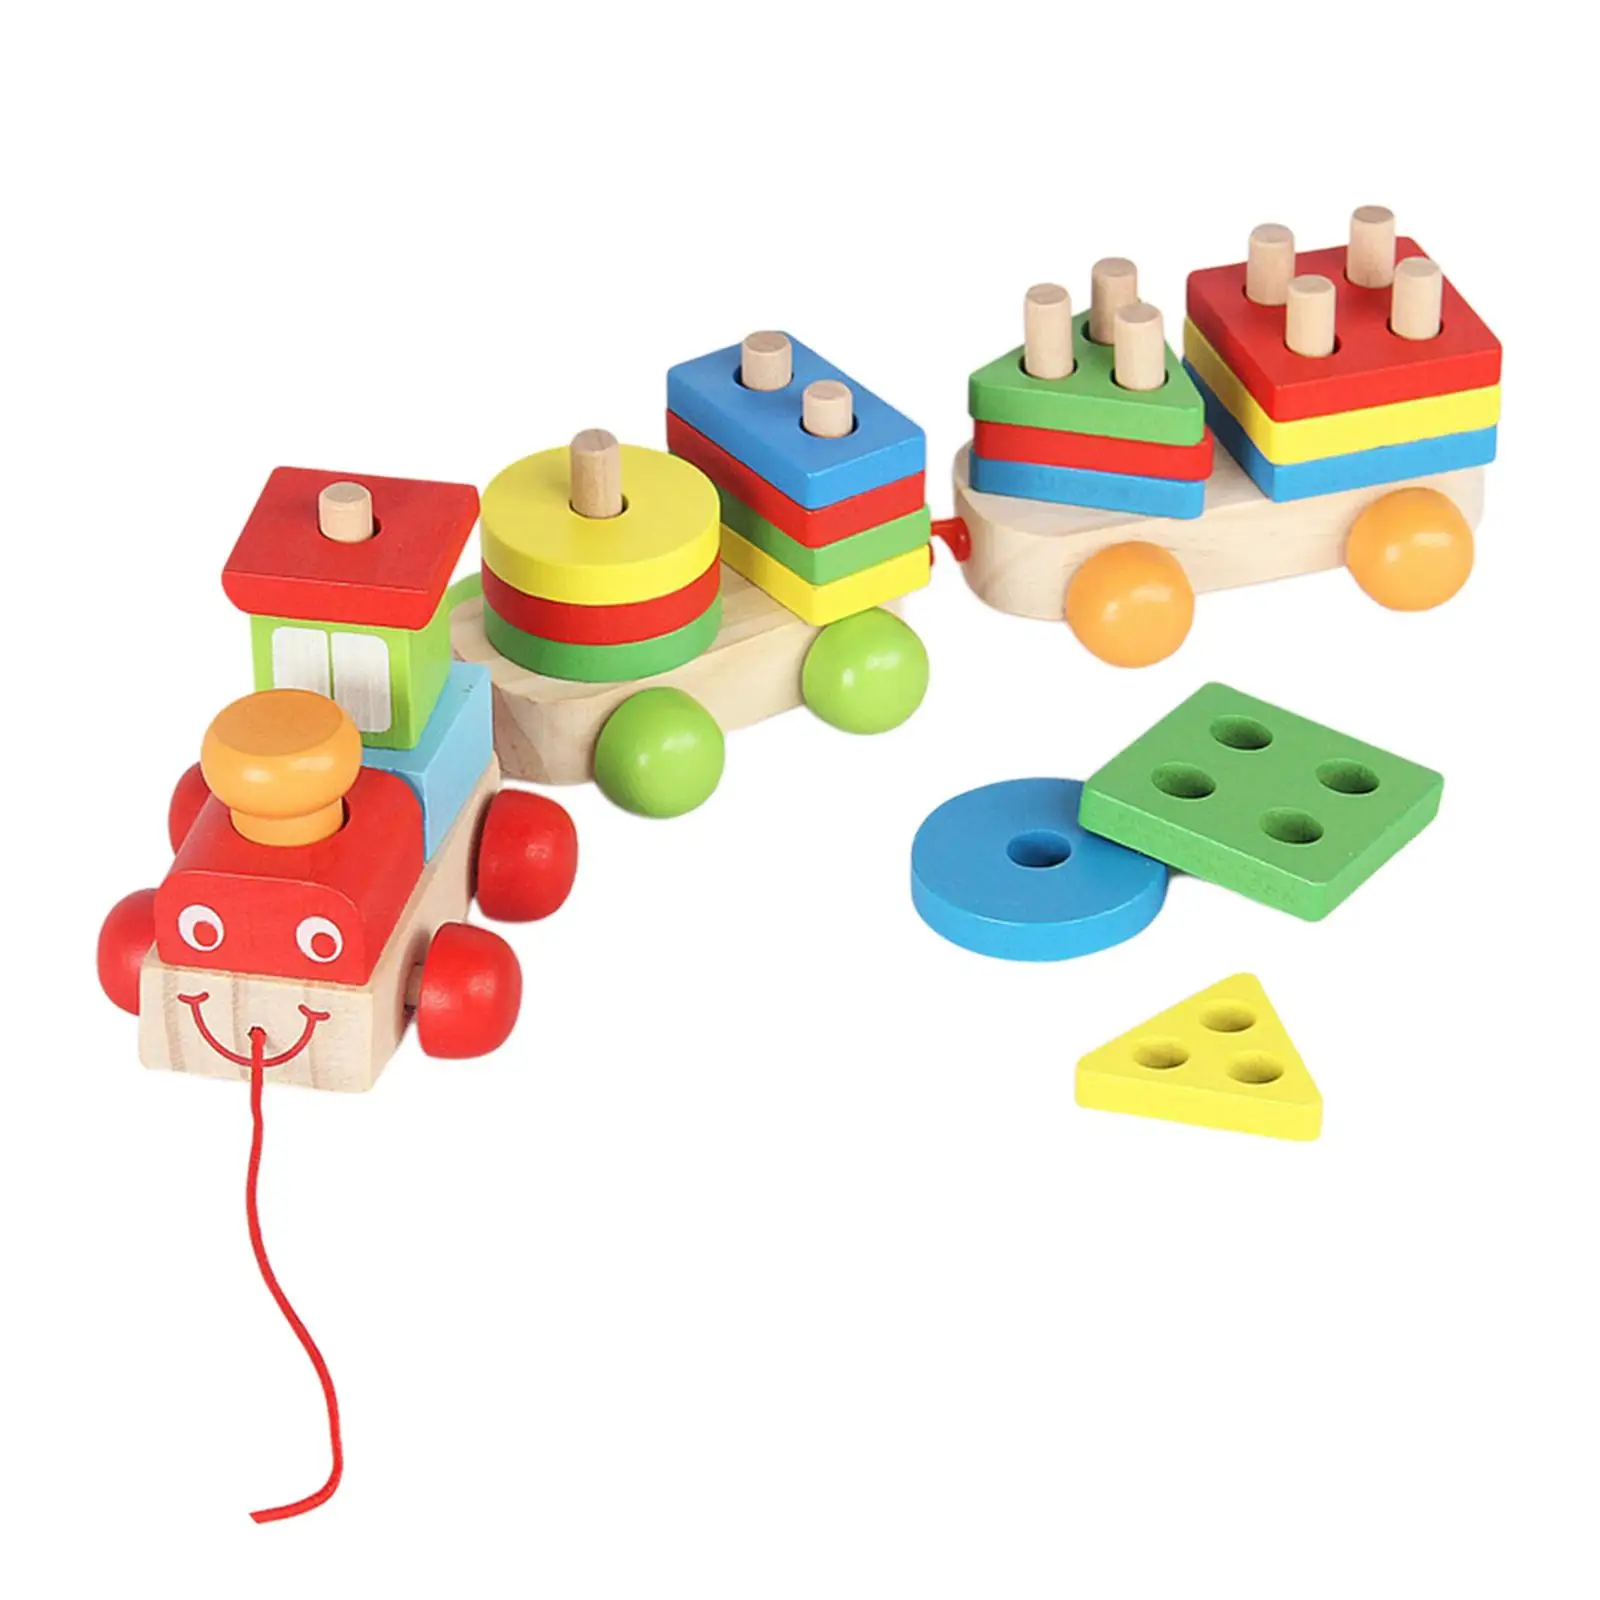 Creative Train Montessori Toys Intelligence Toy Shape Color Recognition Blocks for Boy Preschool Children Toddlers Holiday Gifts